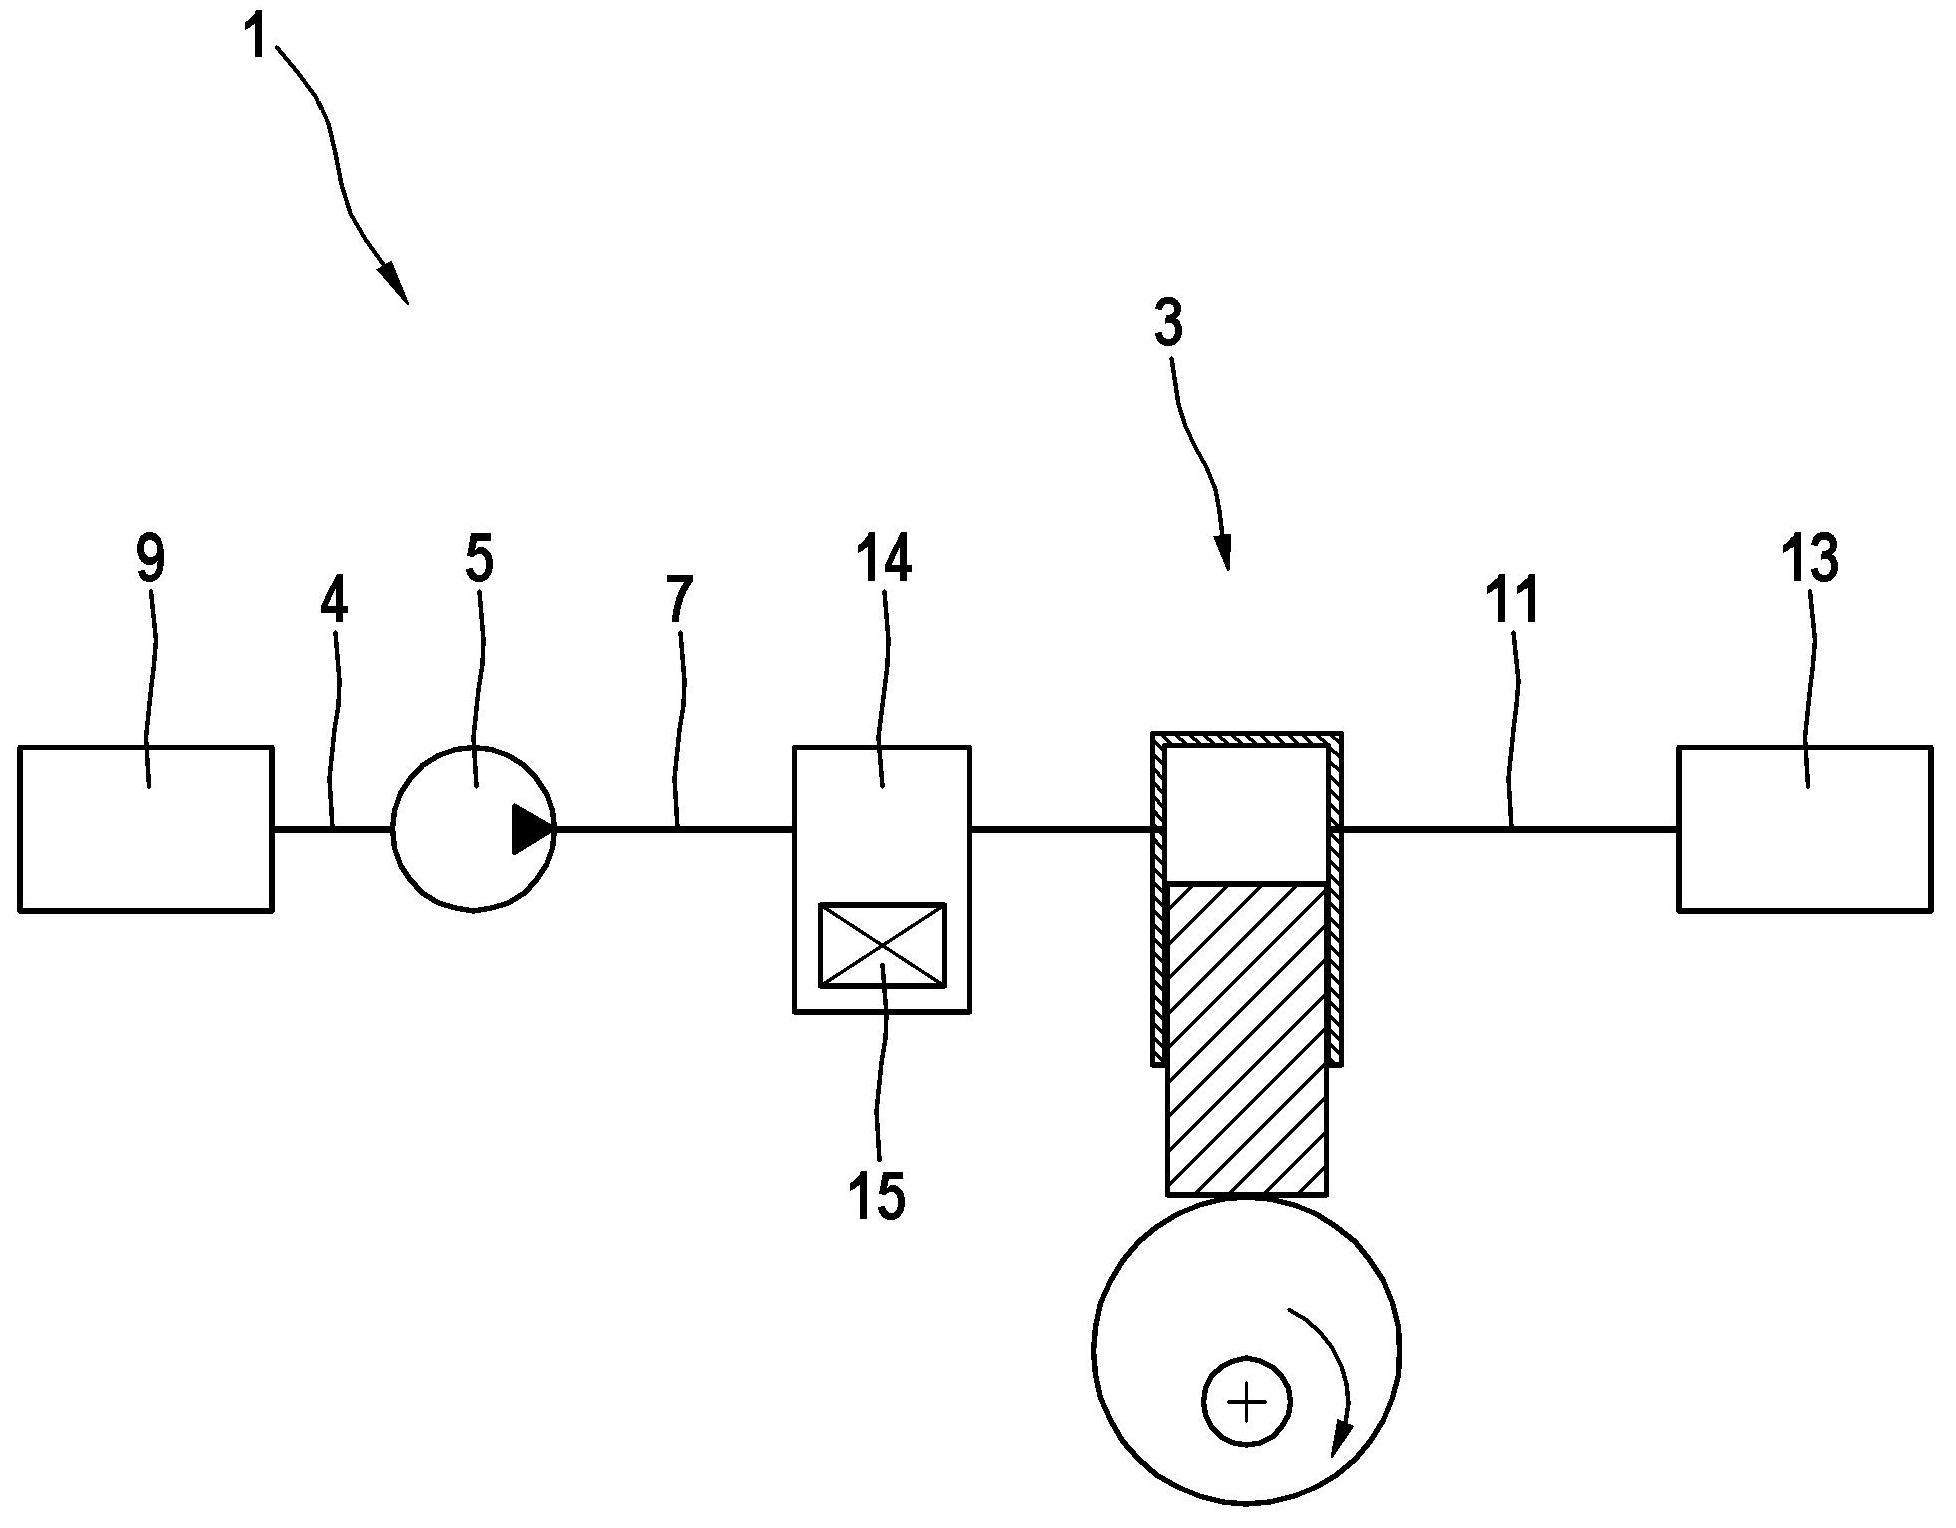 Electromagnetically actuated volume control valve, in particular for controlling the delivery volume of a high-pressure fuel pump